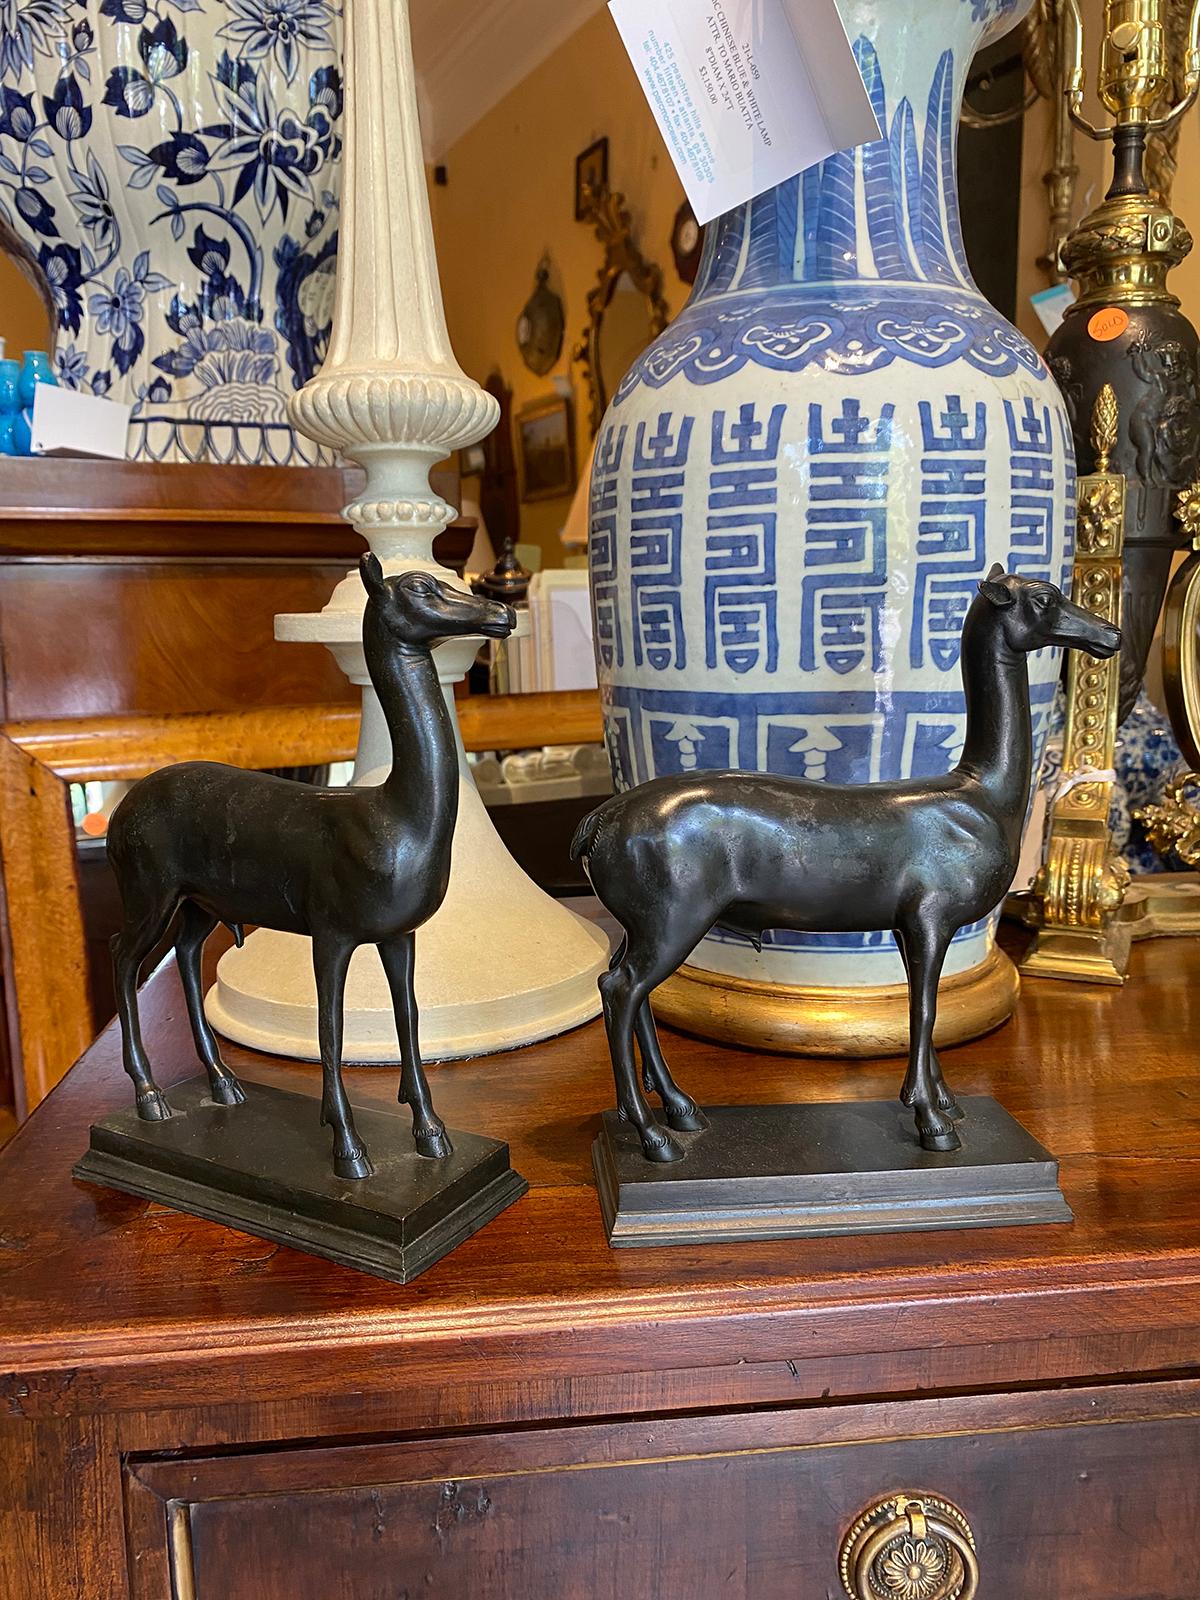 Pair of late 19th-early 20th century continental bronze deer after the ancient Pompeian model. Base measures 6